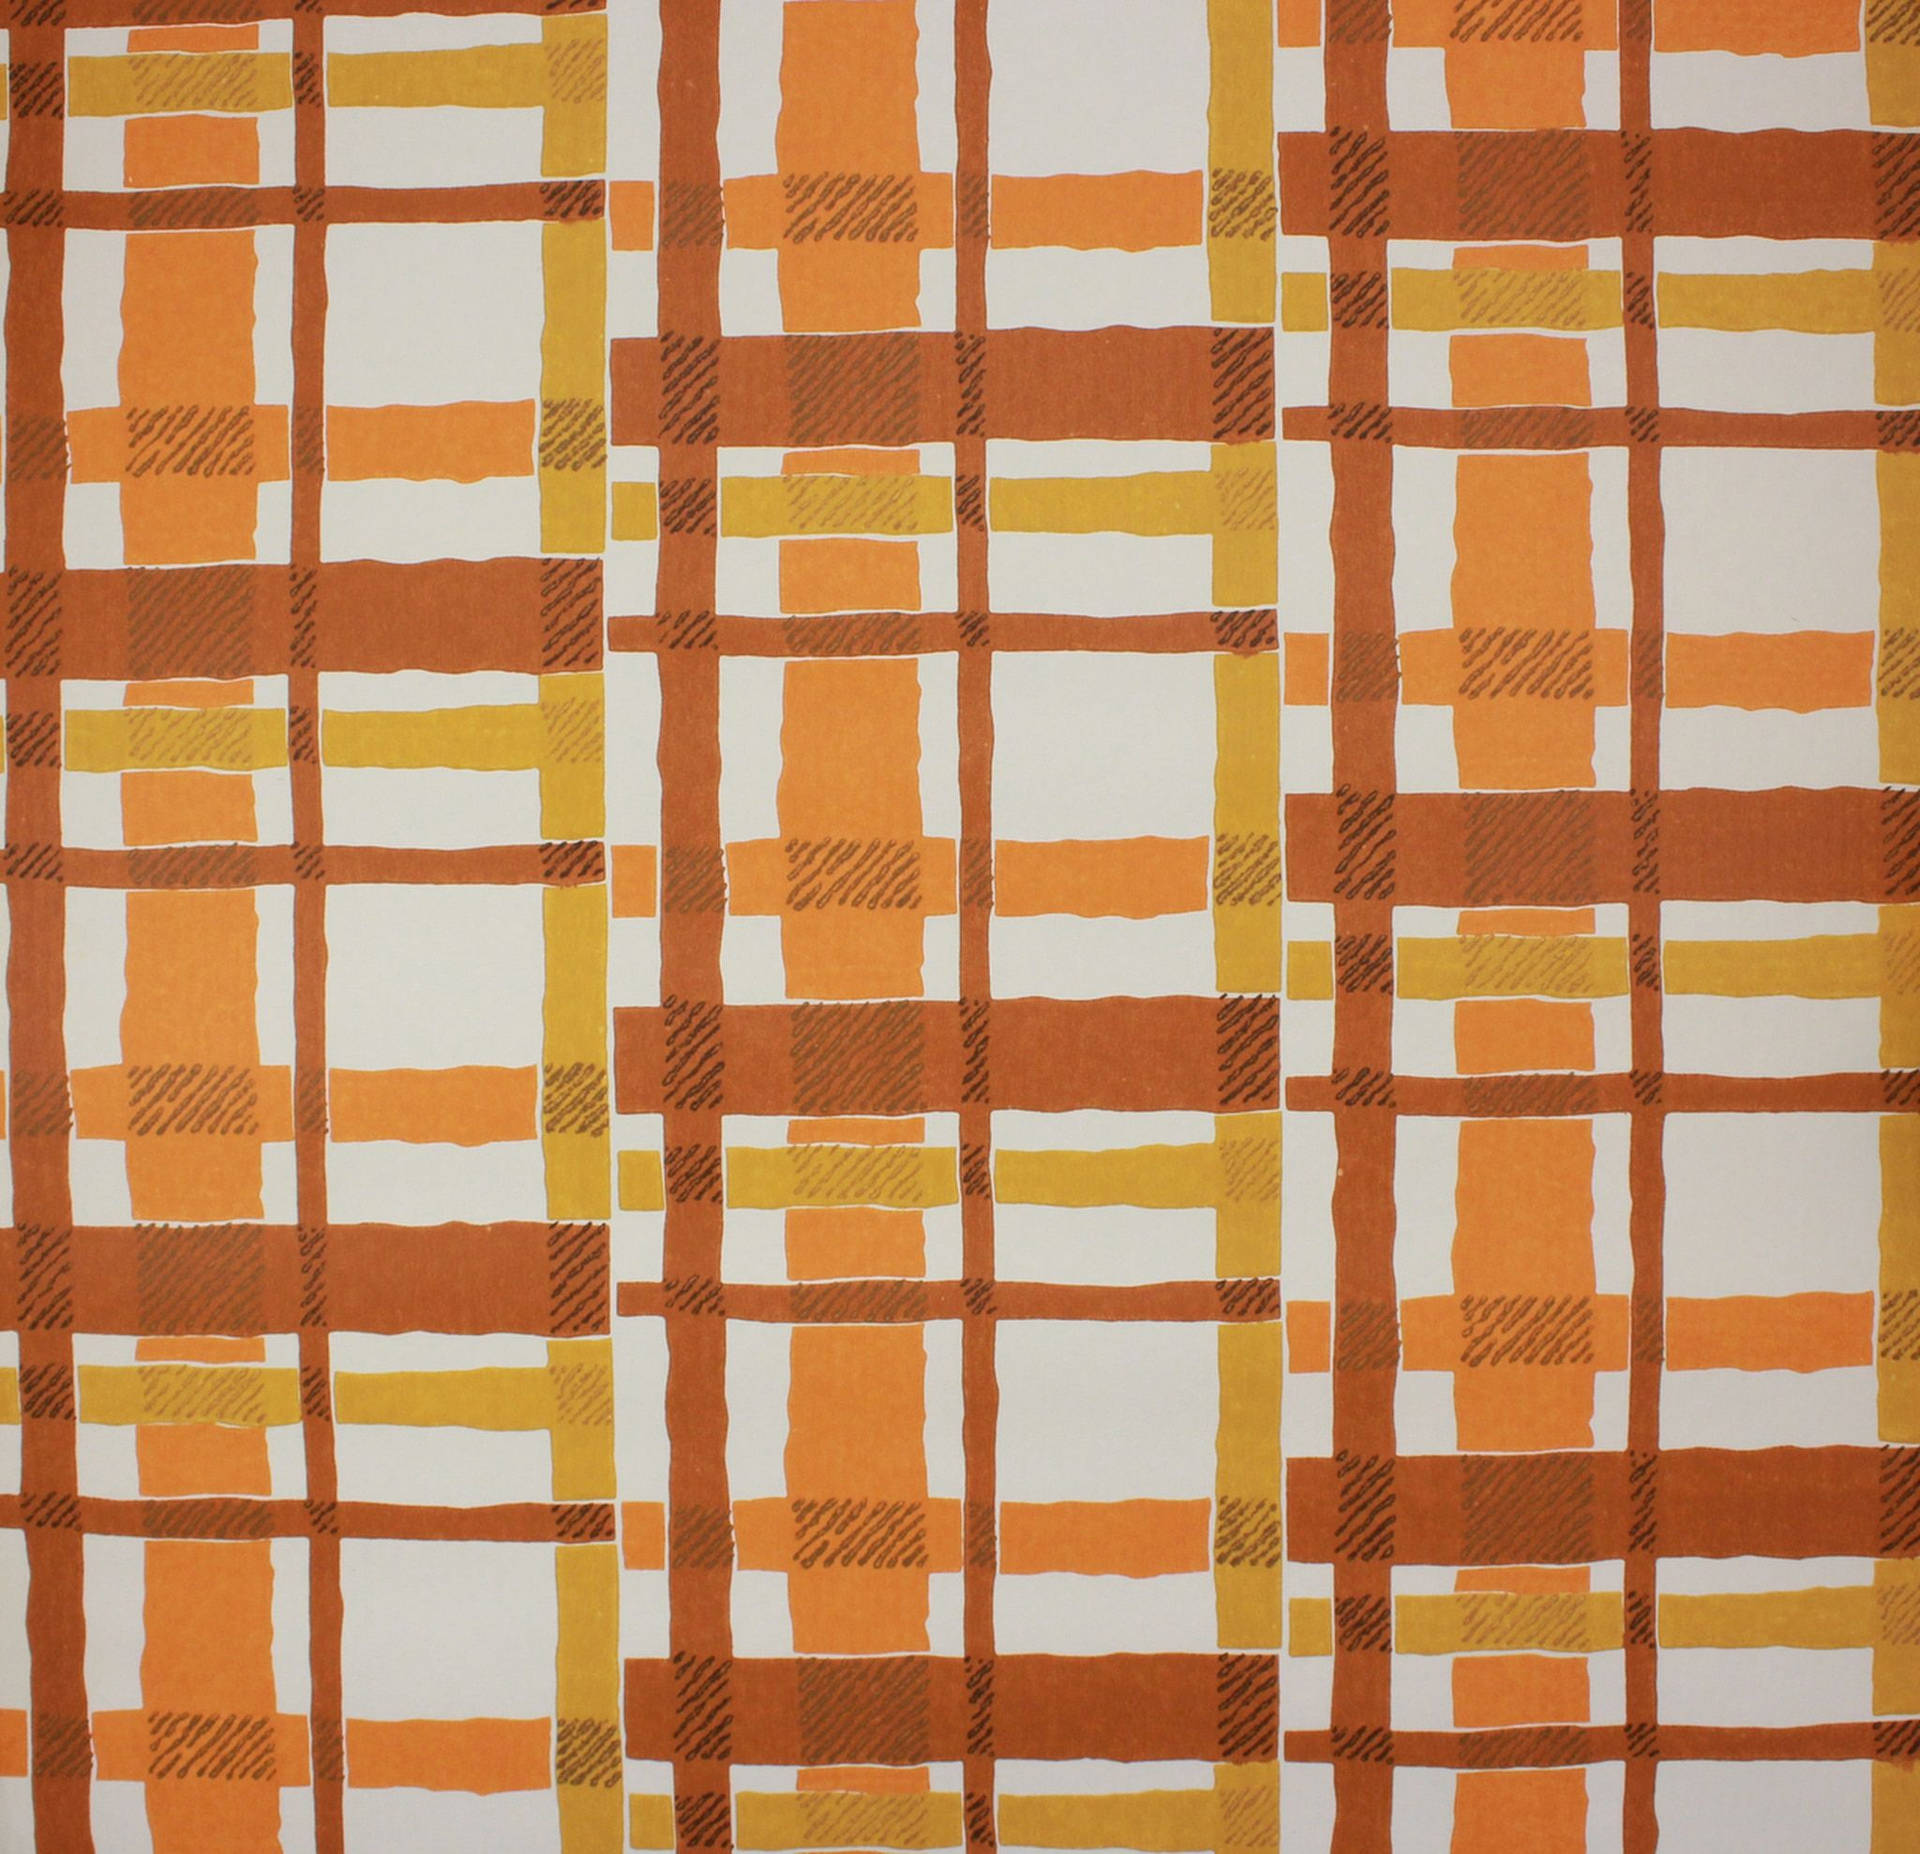 Checkered Orange And Tan Aesthetic Background